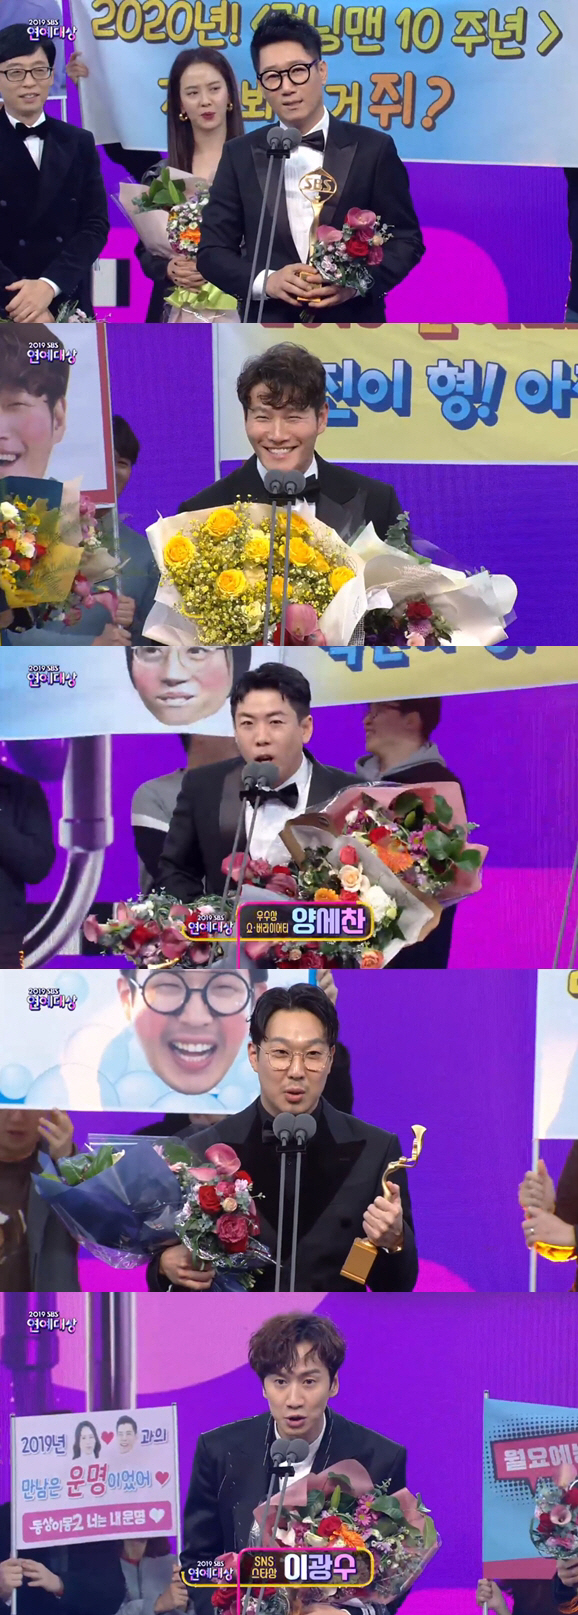 Yoo Jae-Suk of Running Man won the Grand Prize of 2019 SBS Entertainment Grand Prize.On the 28th, 2019 SBS Entertainment Grand Prize was held at SBS Prism Tower in Sangam-dong, Mapo-gu, Seoul, with Kim Sung-joo, Park Na-rae and Cho Jung-sik.On the day of the Grand Prize, Shin Dong-yeop, Baek Jong One, Yoo Jae-Suk, Kim Gura, Kim Byung-man, Kim Jong-kook, Lee Seung-gi and Seo Jang-hoon were on the rise.Running Man, which is ahead of the tenth anniversary next year, has won six awards from Grand prize Yoo Jae-Suk to Global Program Award, Best Award (Kim Jong-kook), Excellence Prize (Yang Se-chan), Entertainer Award (Haha), SNS Star Award (Lee Kwang-soo).Yoo Jae-Suk, who won the Grand Prize at SBS Entertainment Grand Prize in four years after 2015, said, I am so grateful.Running Man finally won a big prize for next years tenth anniversary. I sincerely thank the crew and members.If I get a Grand prize, I would like to receive it with the members, but I am grateful and sorry that I have received a big prize alone. First, I expressed my gratitude to the members and crew of Running Man.He also thanked other Grand Prize candidates and his loved ones.Yoo Jae-Suk, who has been active in Running Man for 9 years, said, Thank you so much for the members who have been together for 10 years.I was in a lot of trouble, but thank you for trying to rely on each other.I am deeply grateful to the production team and members who have been firmly on the road, and the viewers who have been together, even though Variety is gradually losing their place in the arts.It is true that there is a homework to show what kind of change will be shown next year, but I will try to develop it. Especially, Yoo Jae-Suk said, Of the many guests of Running Man, I think a lot of Mr. Goo Hara and Mr. Sulli who left for heaven this year.I want to do what I want to do comfortably in heaven. I thank you both. Finally, Yoo Jae-Suk said, If you used to think about happy work, pleasant work a lot, I think that you are grateful for your ordinary and comfortable day and everyday life these days.I would like to say thank you again to many people who have made me spend such a precious daily life.  I do not know what I will show you next year, but I will pioneer the way that others do not go and I will make many new entertainers born. Meanwhile, another strong Grand Prize candidate, Baek Jong One, won the Achievement Award.Thank you, I dont know if you deserve it, but many people have tried this year, and Ive done it, said Baek Jong One, who won the Achievement Award for Alley Restaurant and Matnams Square.I will work harder and narrowly SBS, and I will do what I can give to the people. He said, We get energy because of those who come to the shop and rest area where we appeared on the air while doing Alley Restaurant and Maman Square and eat and eat.I am encouraged by the idea that it can influence society. Yes, thanks to you and our guests, we feel more responsible and work hard.I will work hard to reach my strength.  I will try my best to see hope by giving the self-employed people, farmers and fishermen of the alley, and I will do my best. 